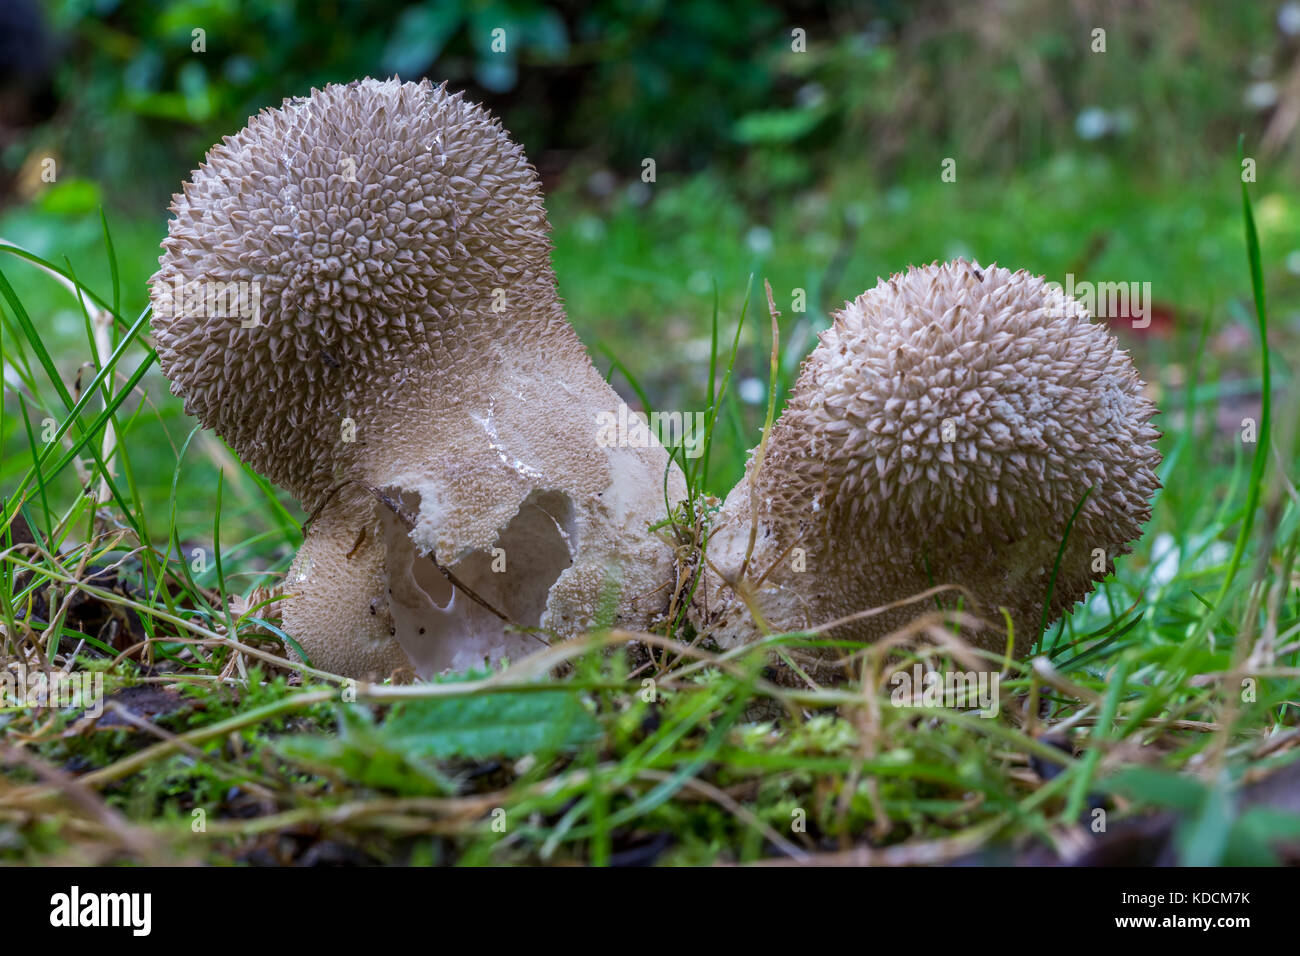 Giant Puffball grows out of the ground surrounded by grass. Stock Photo